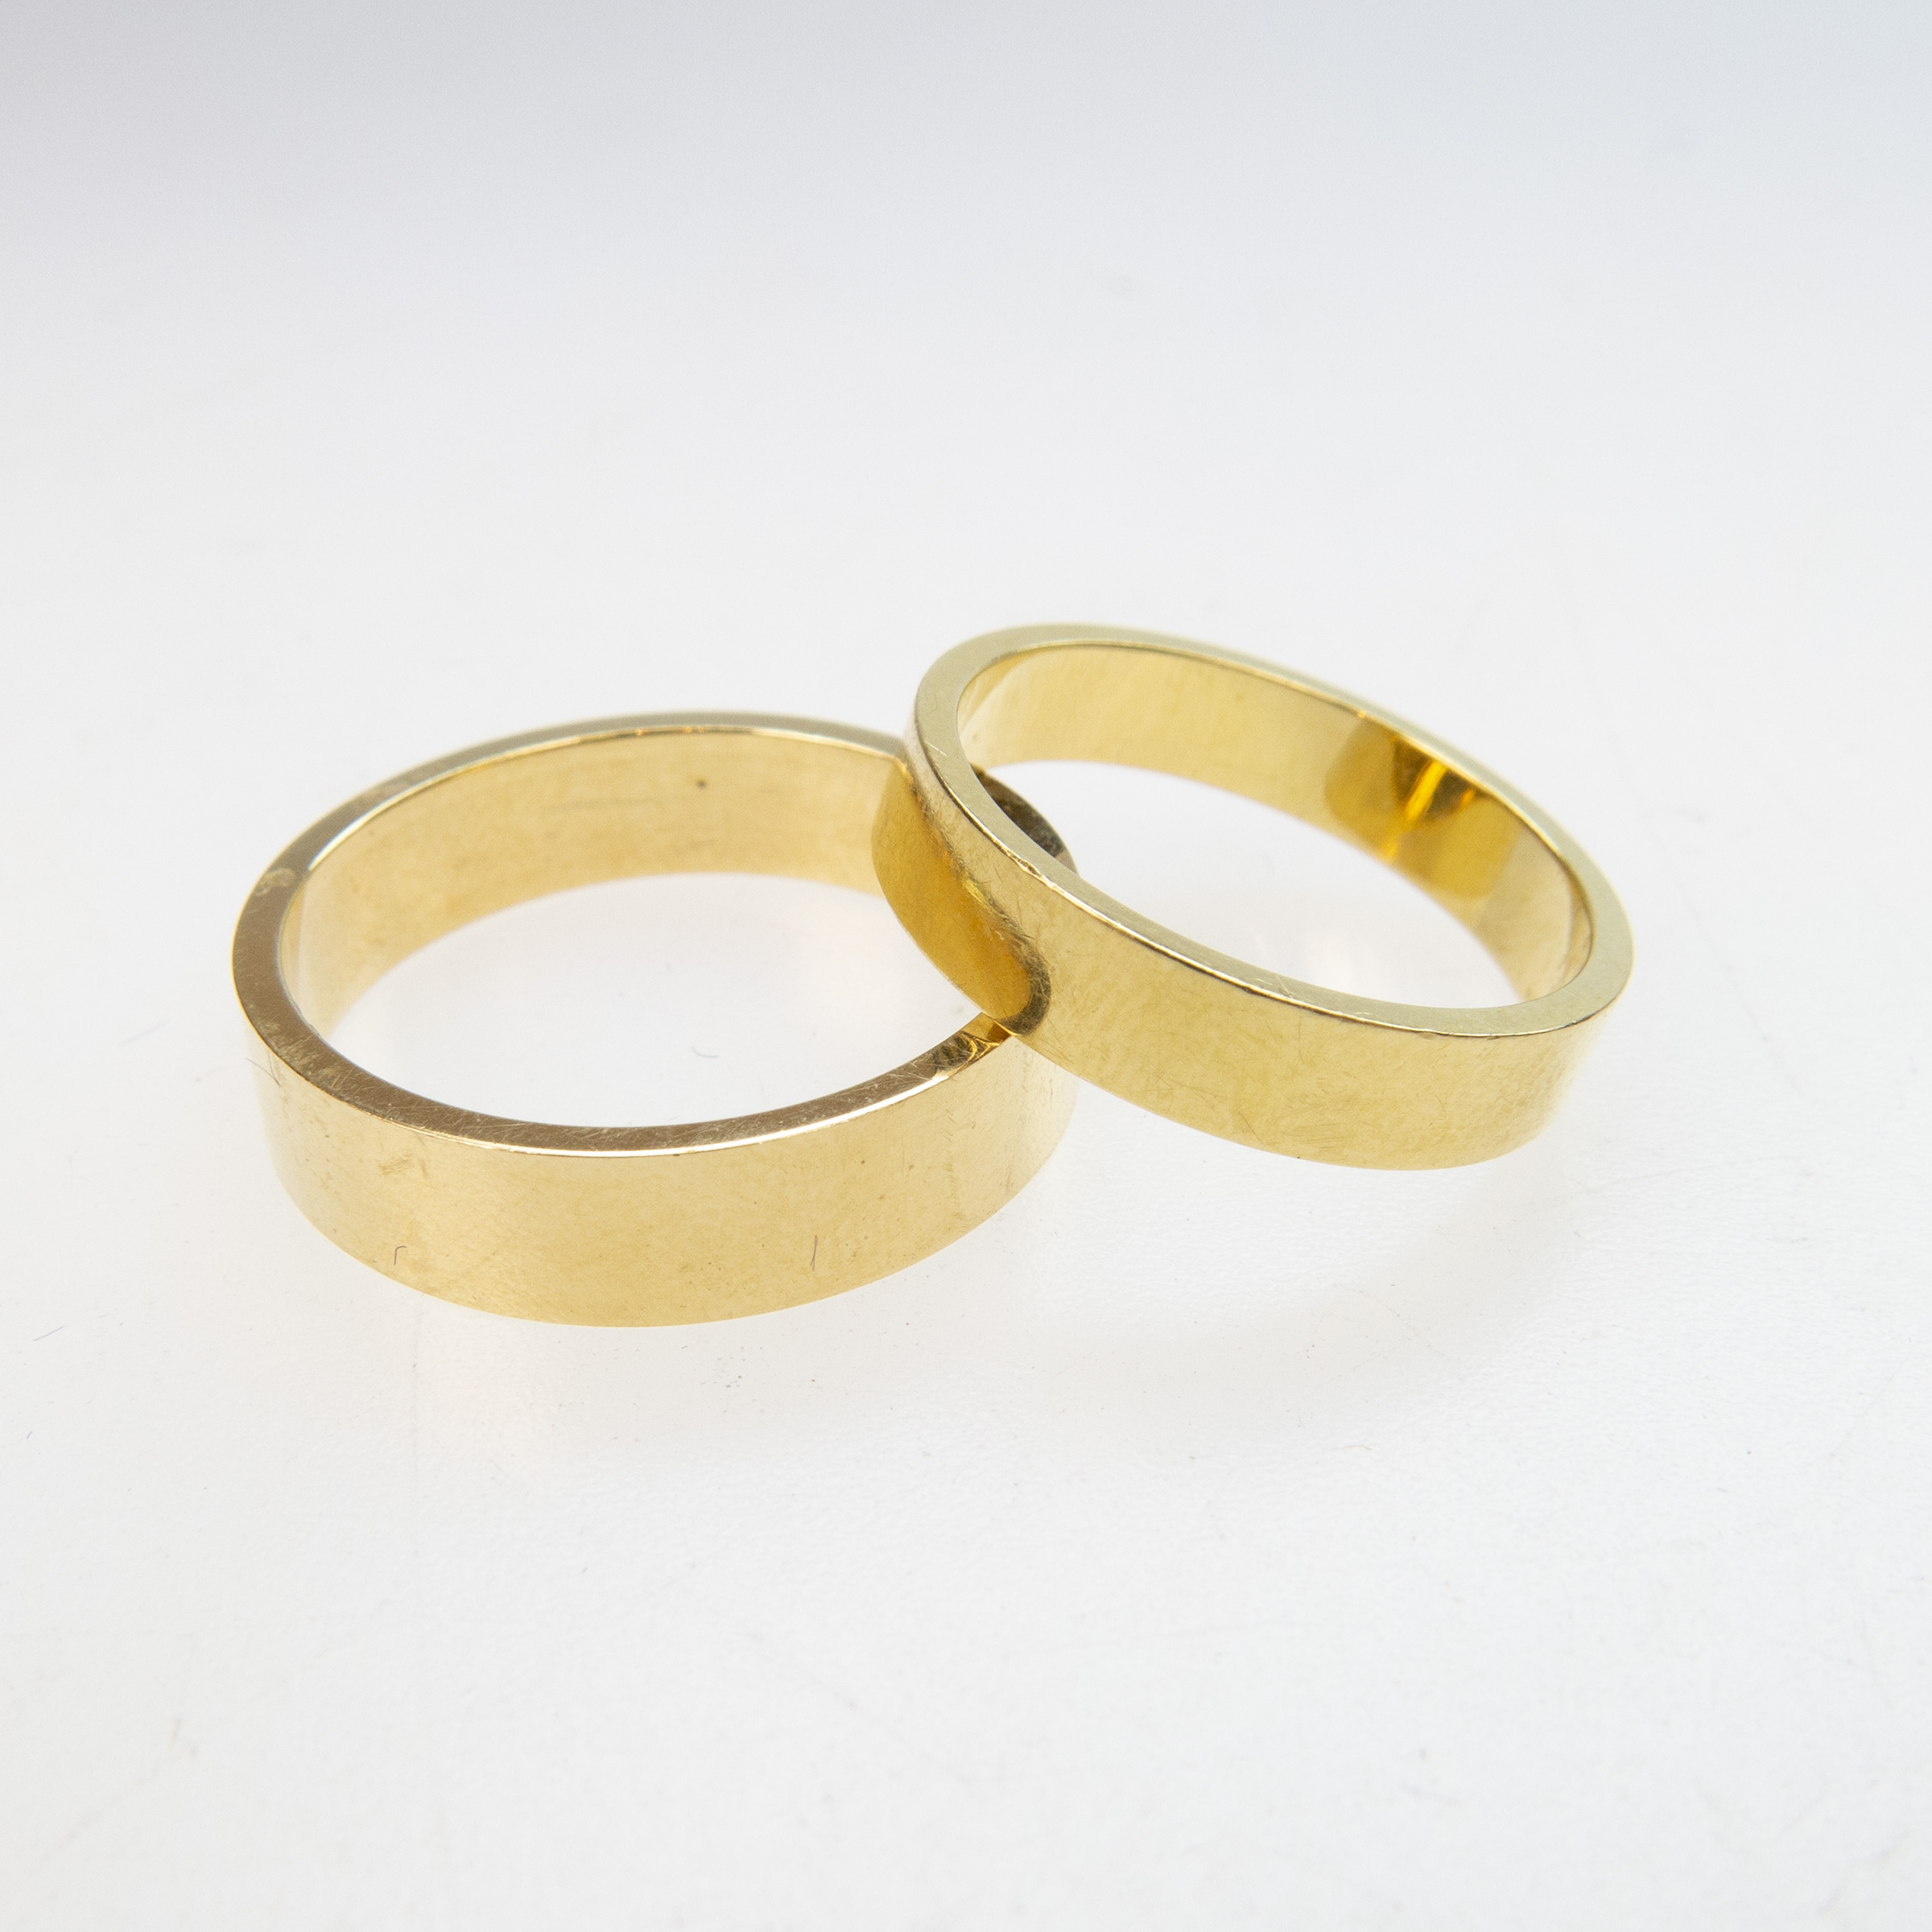 Pair Of 18k Yellow Gold Wedding Bands